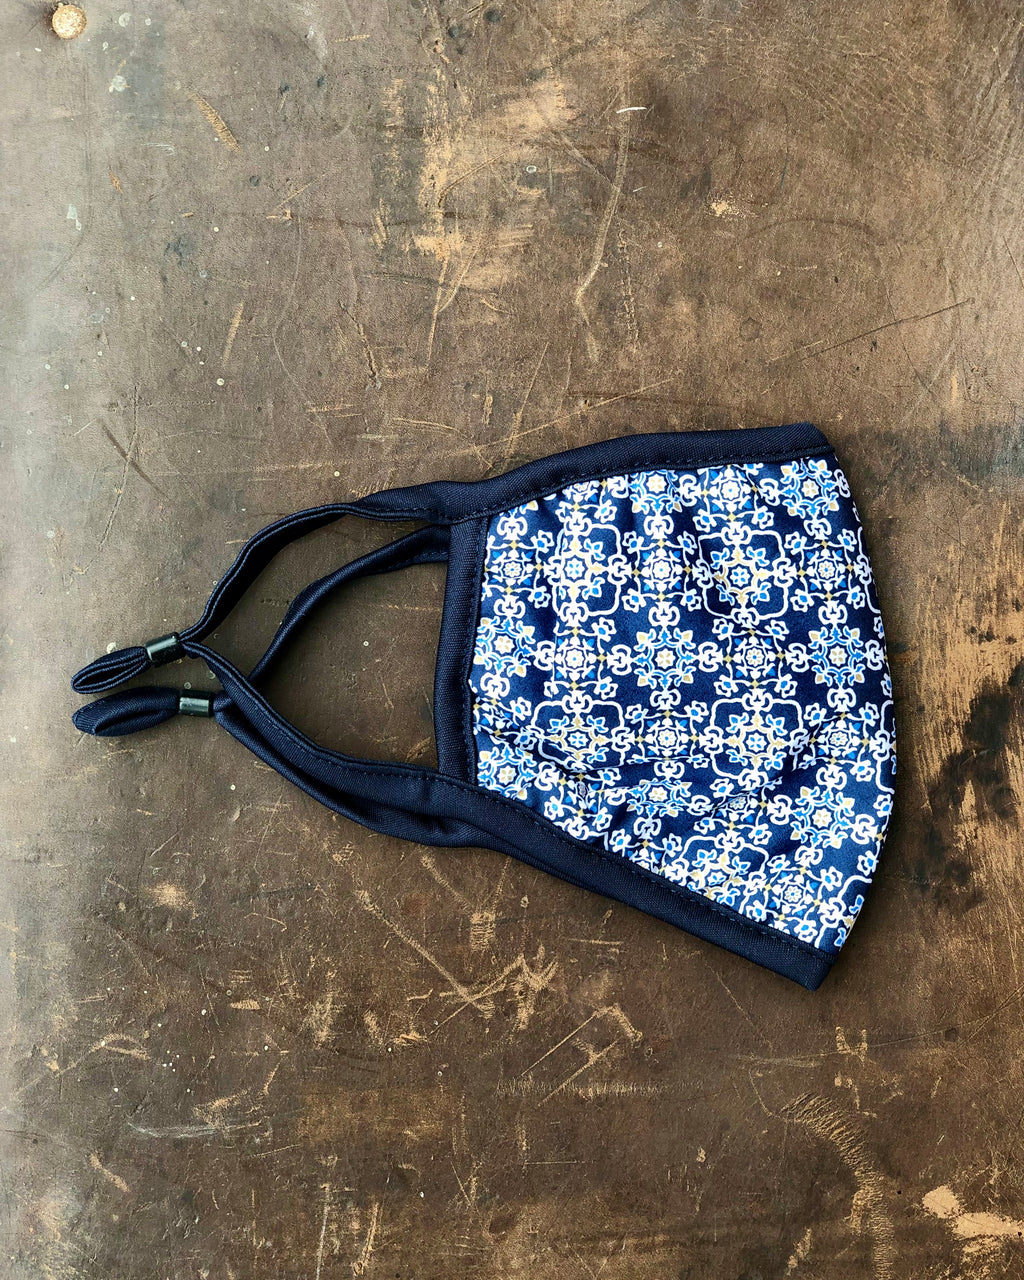 Re-useable Face Mask in navy and light blue cotton print